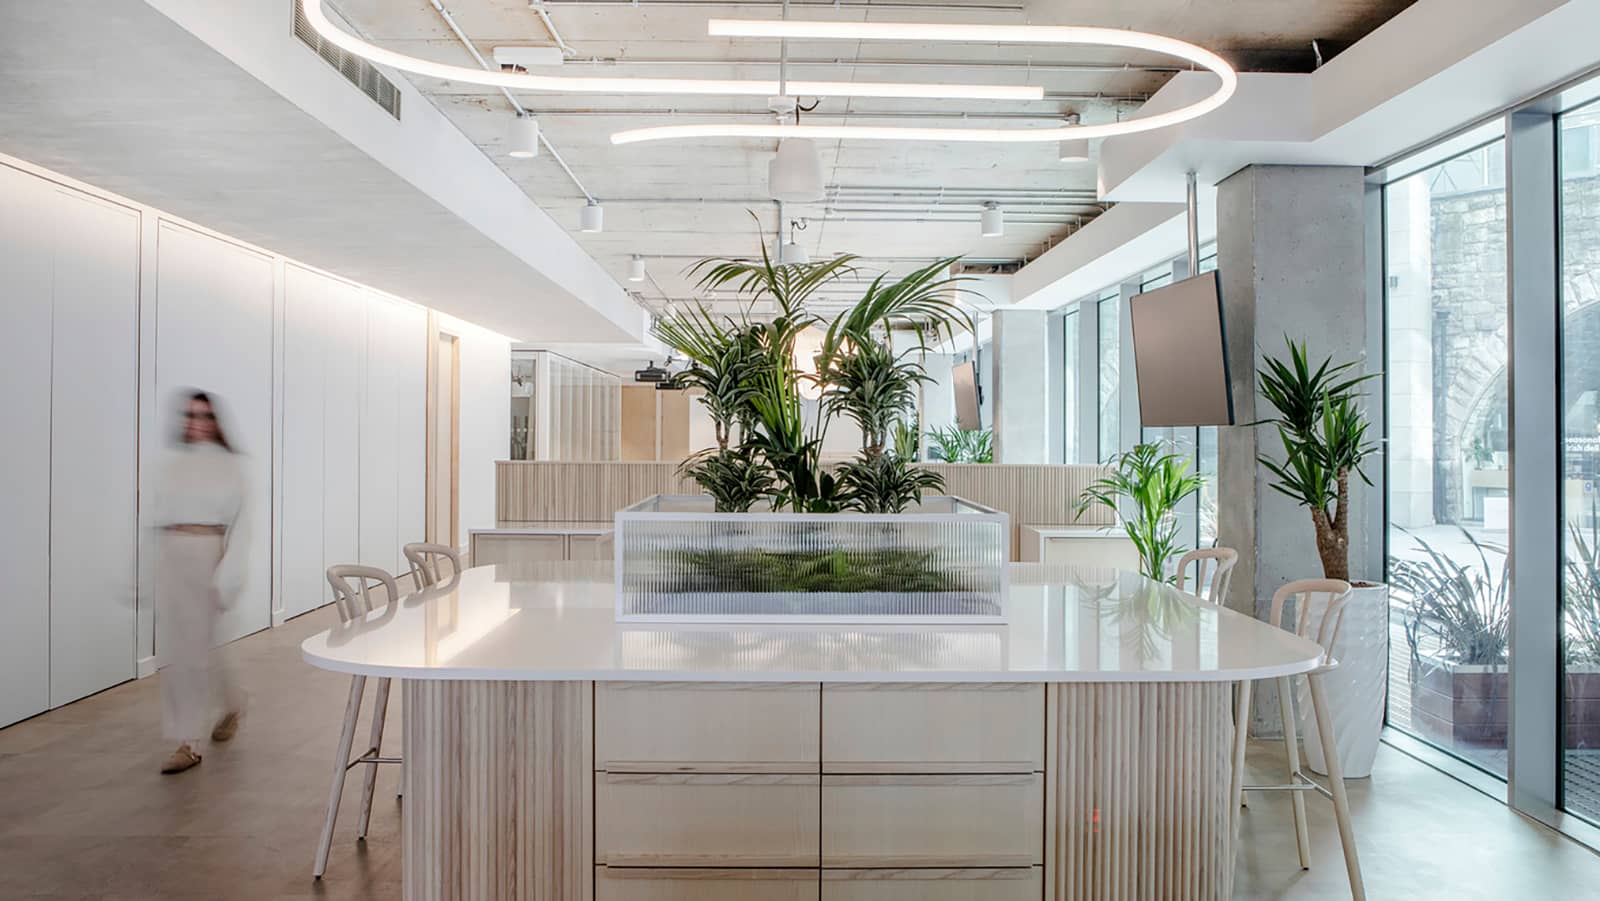 The Dropbox Dublin headquarters features a large worktop space with lightwood finishes, topped with granite and a biophilic display.